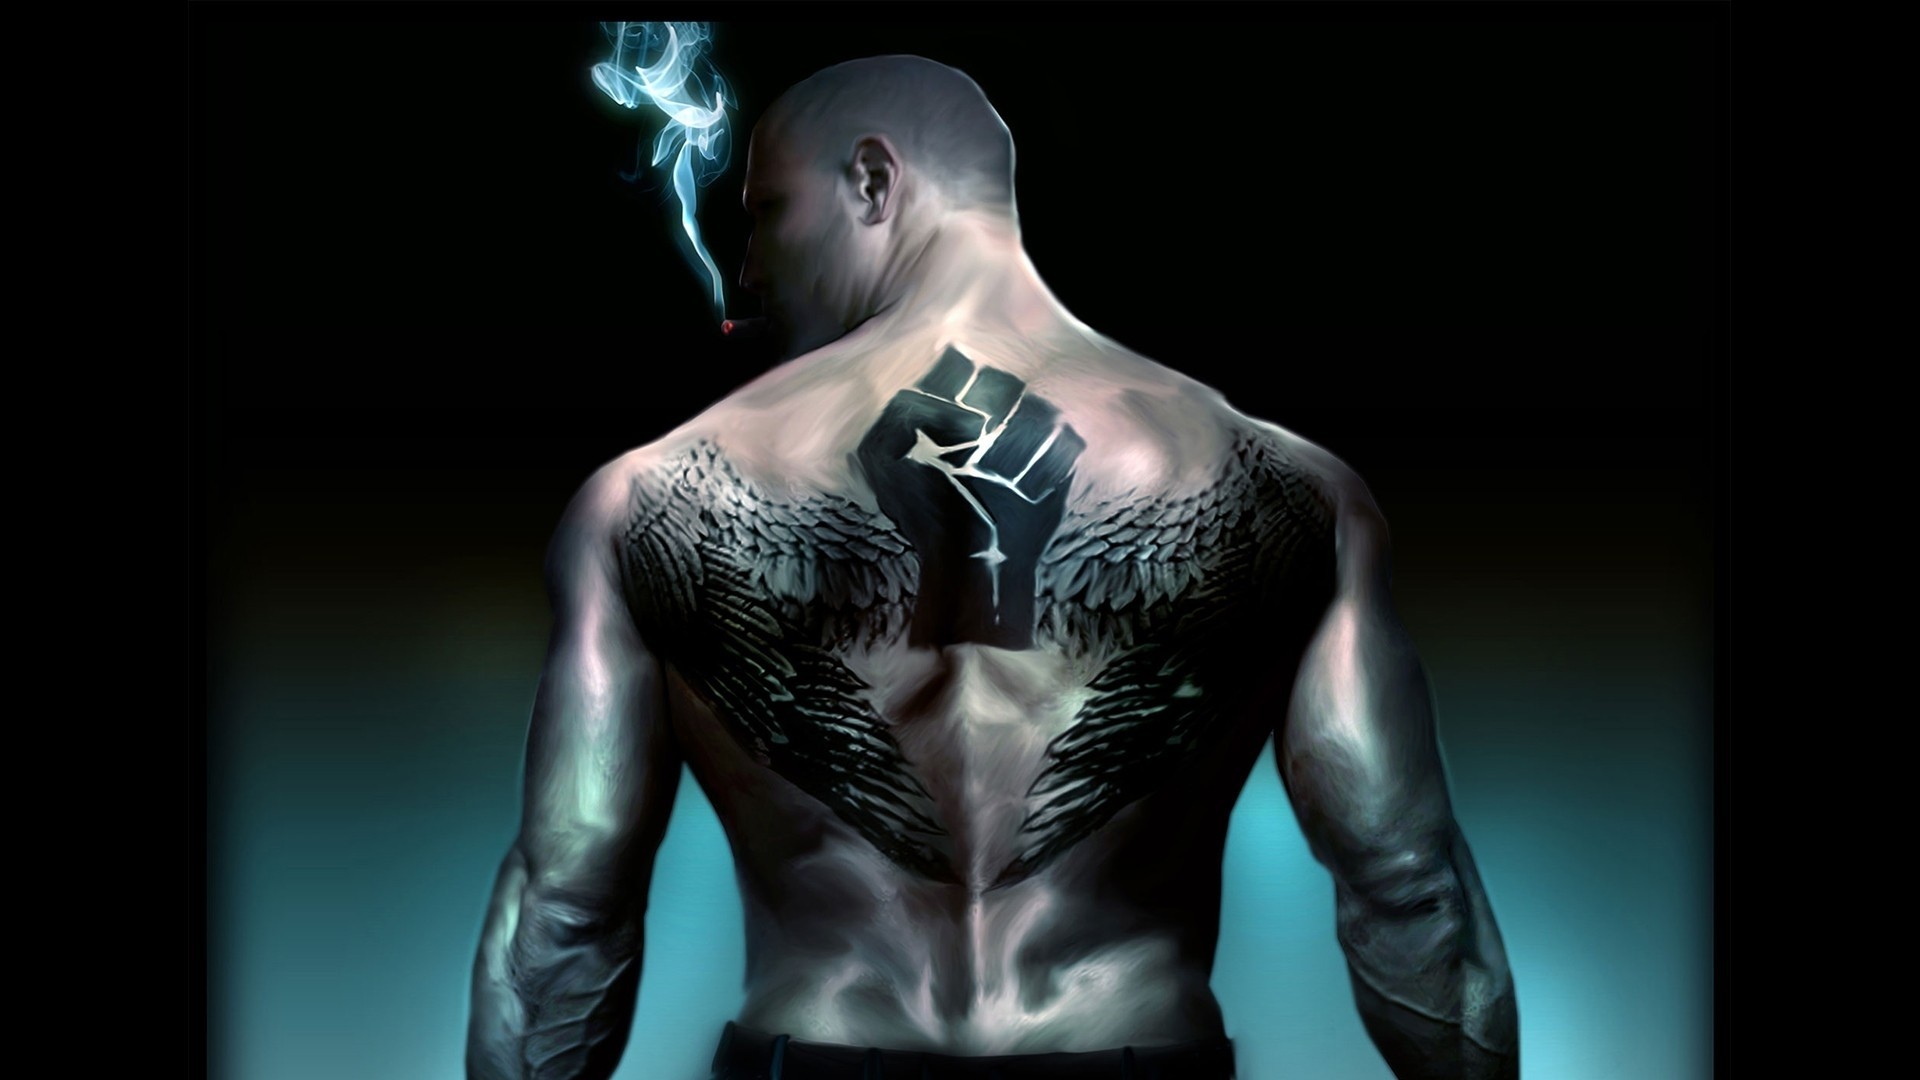 International Film Makers Associated - IFMA - Which of these characters has  the best #Tattoos? A. Aquaman from AQUAMAN B. Michael Scofield from Prison  Break | Facebook